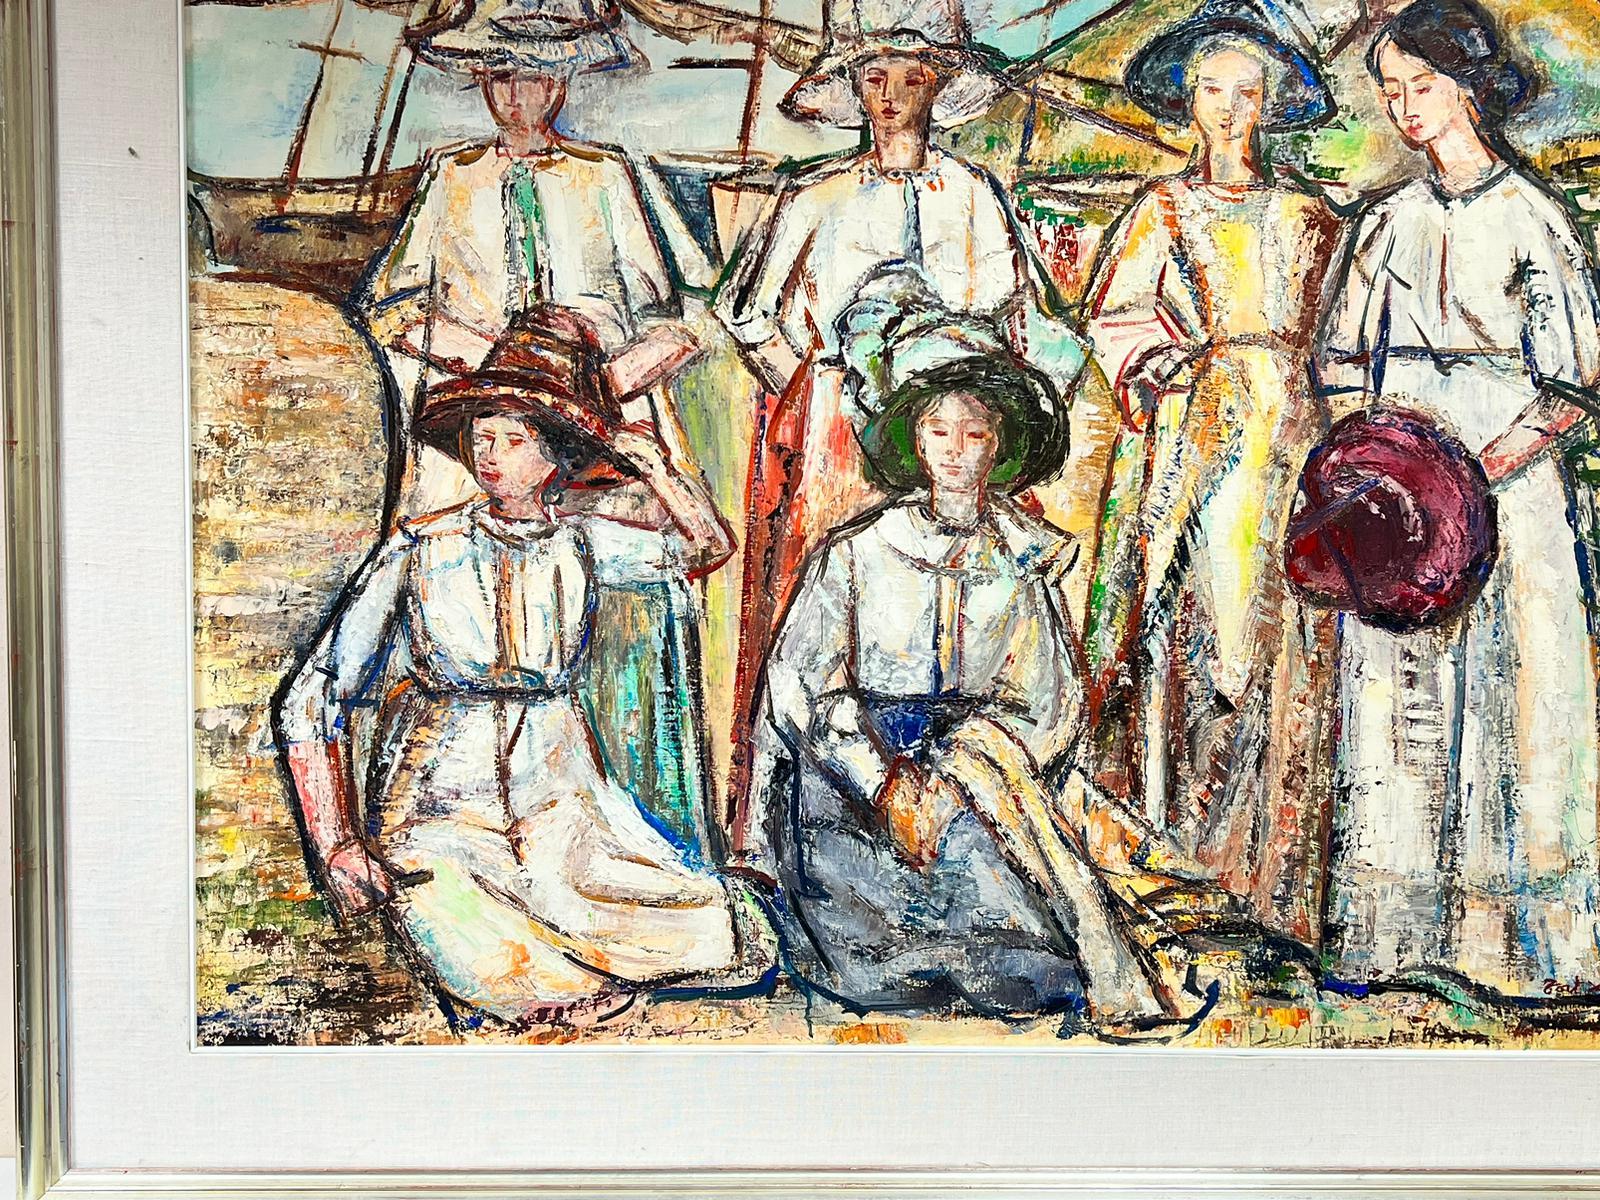 The Group Portrait
by Maria Tort Xirau (Catalan, 1924-2018)
signed lower corner
dated 1991
oil painting on canvas, framed

canvas: 42 x 52 inches
framed: 33 x 43 inches

Very good condition. 

Provenance: from the artists estate, France

Maria Tort